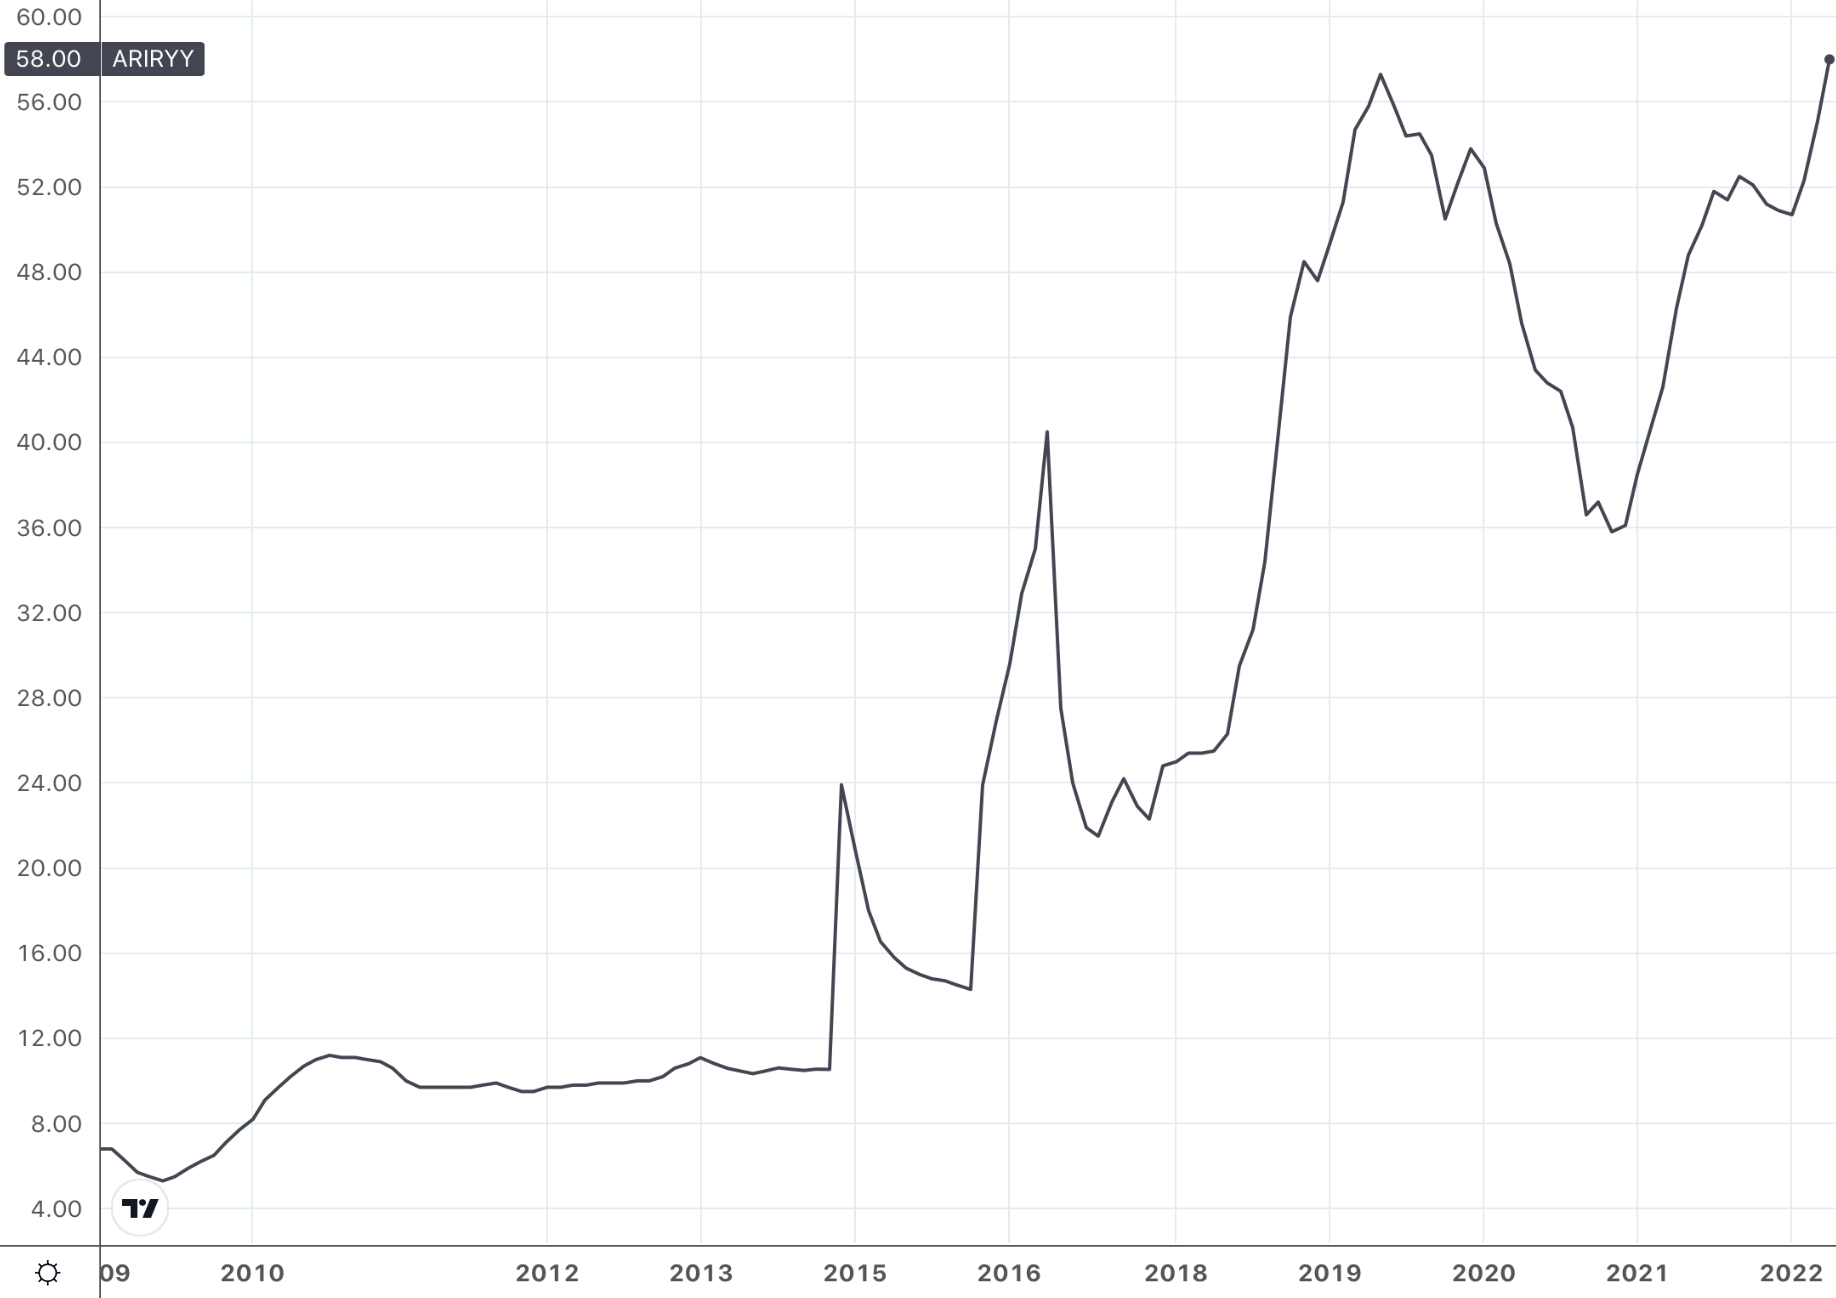 line chart showing Argentina's inflation rate 2009-May 2022